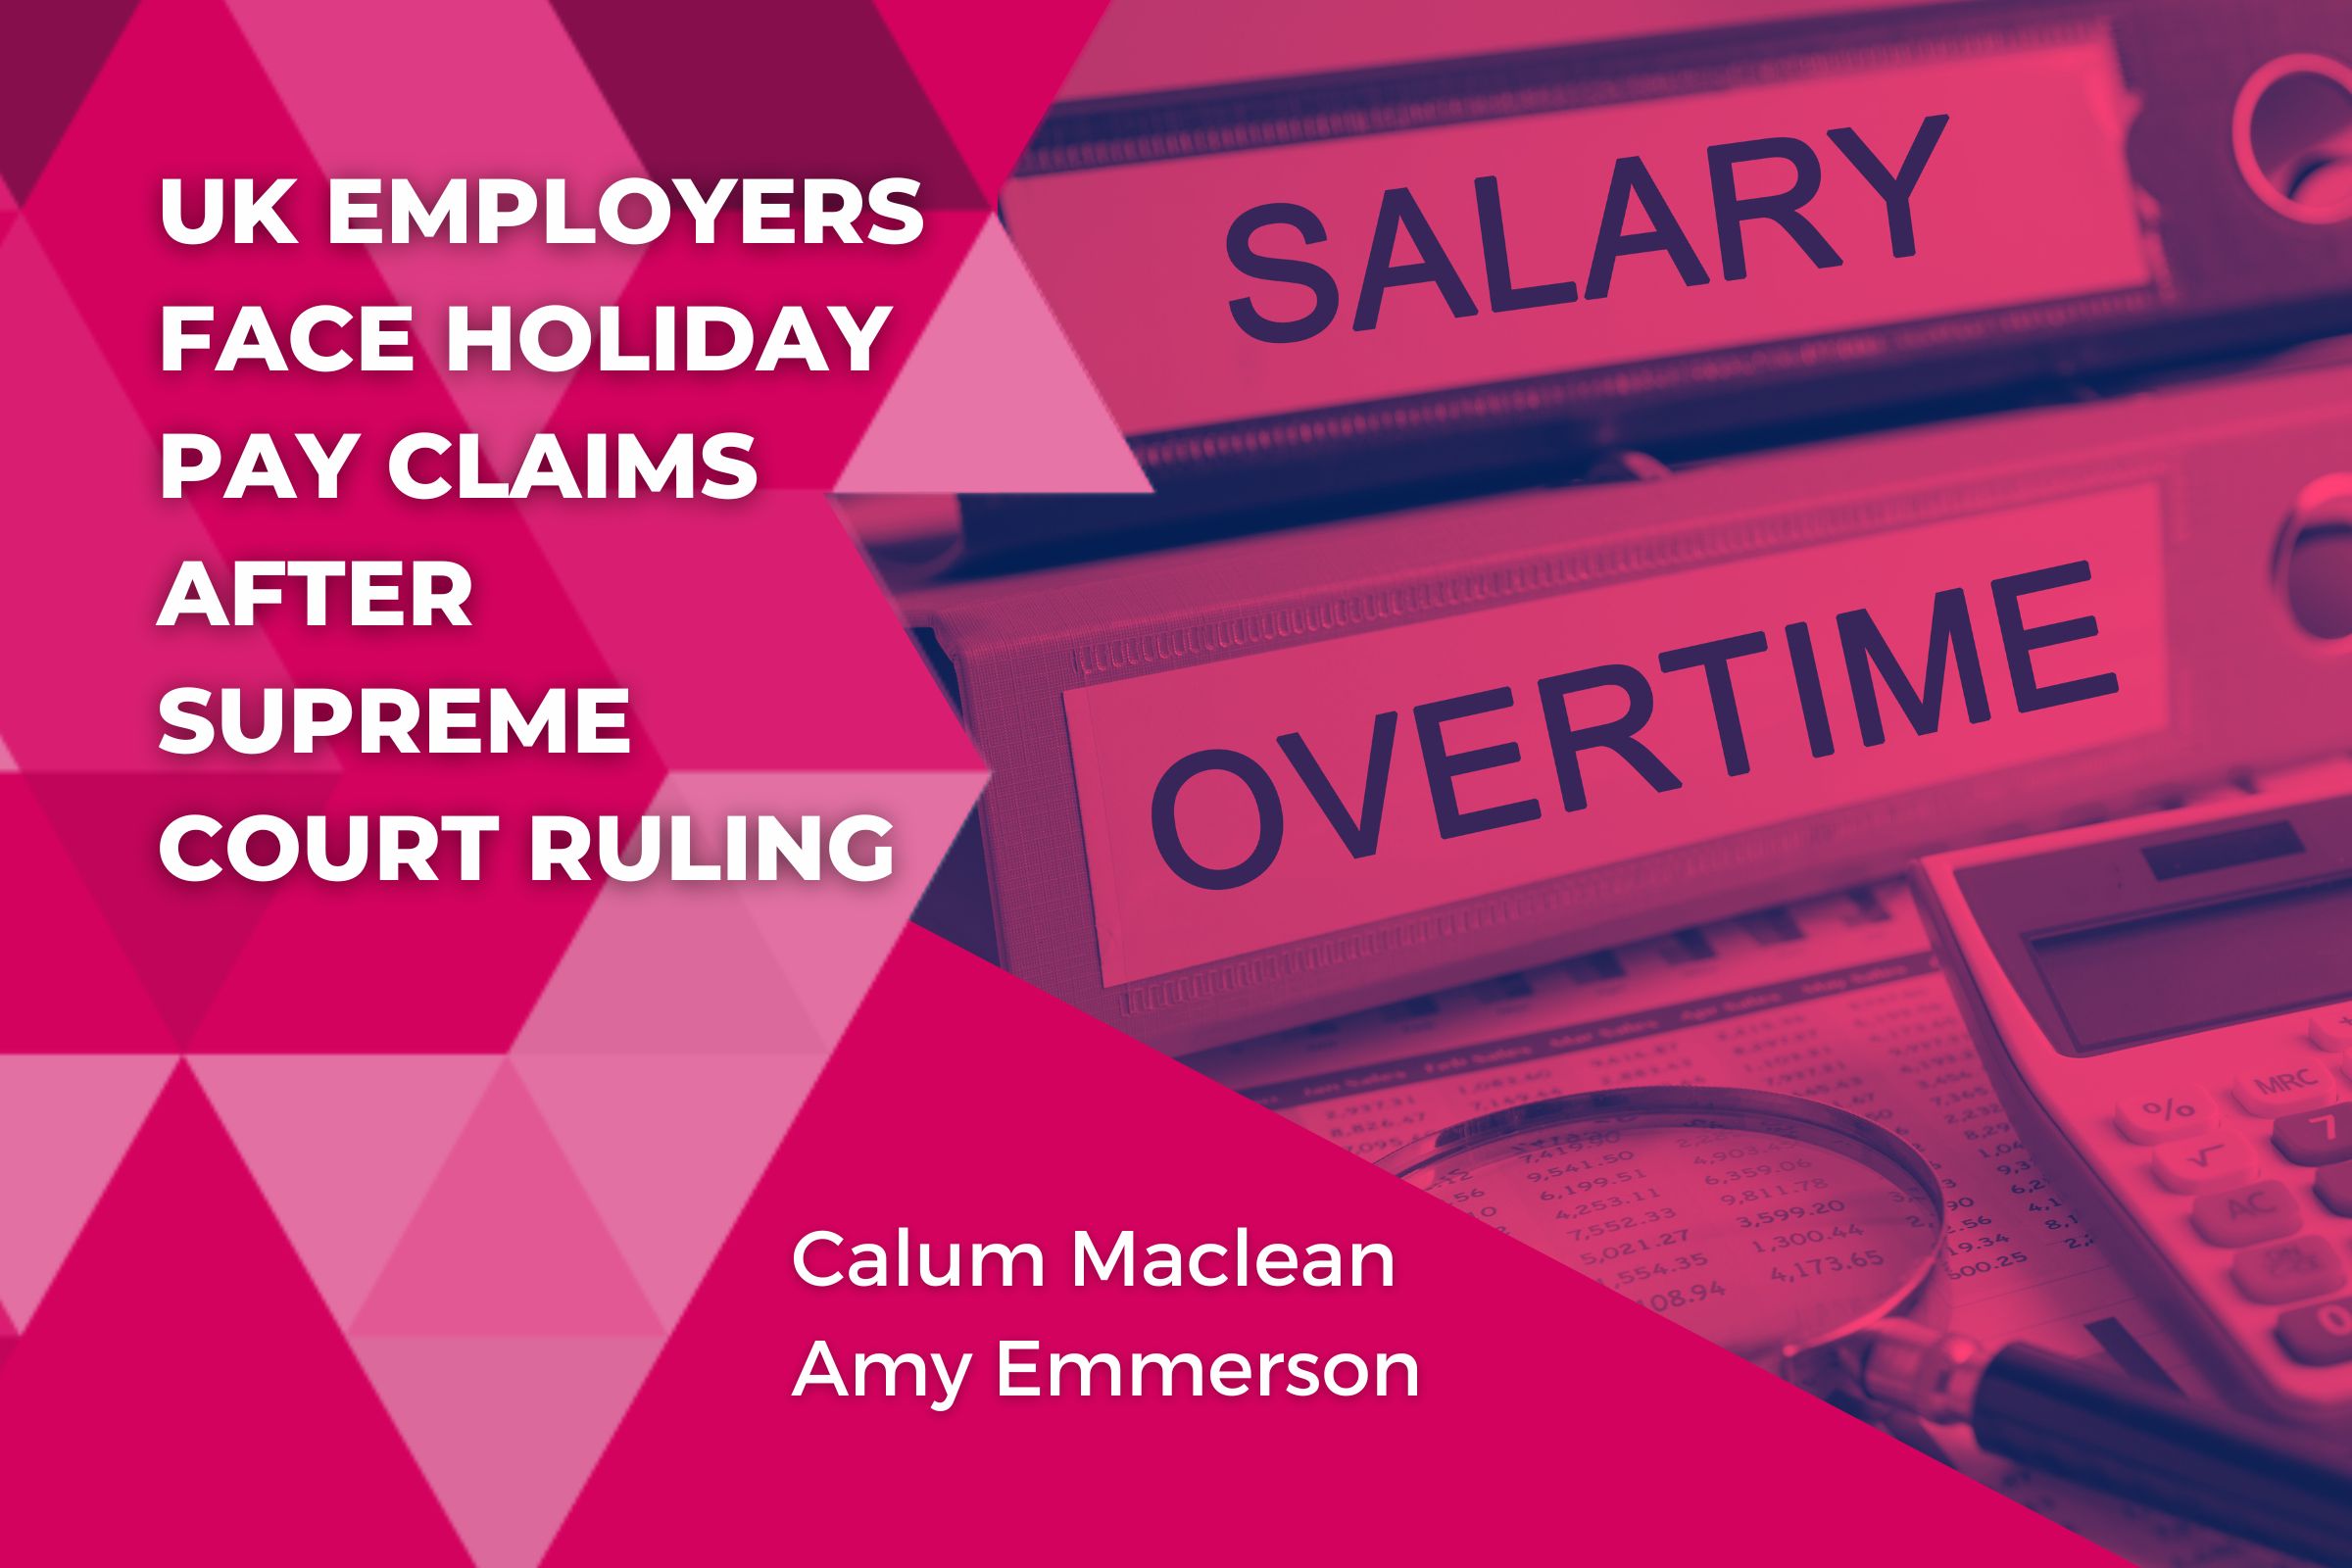 UK Employers Face Holiday Pay Claims After Supreme Court Ruling